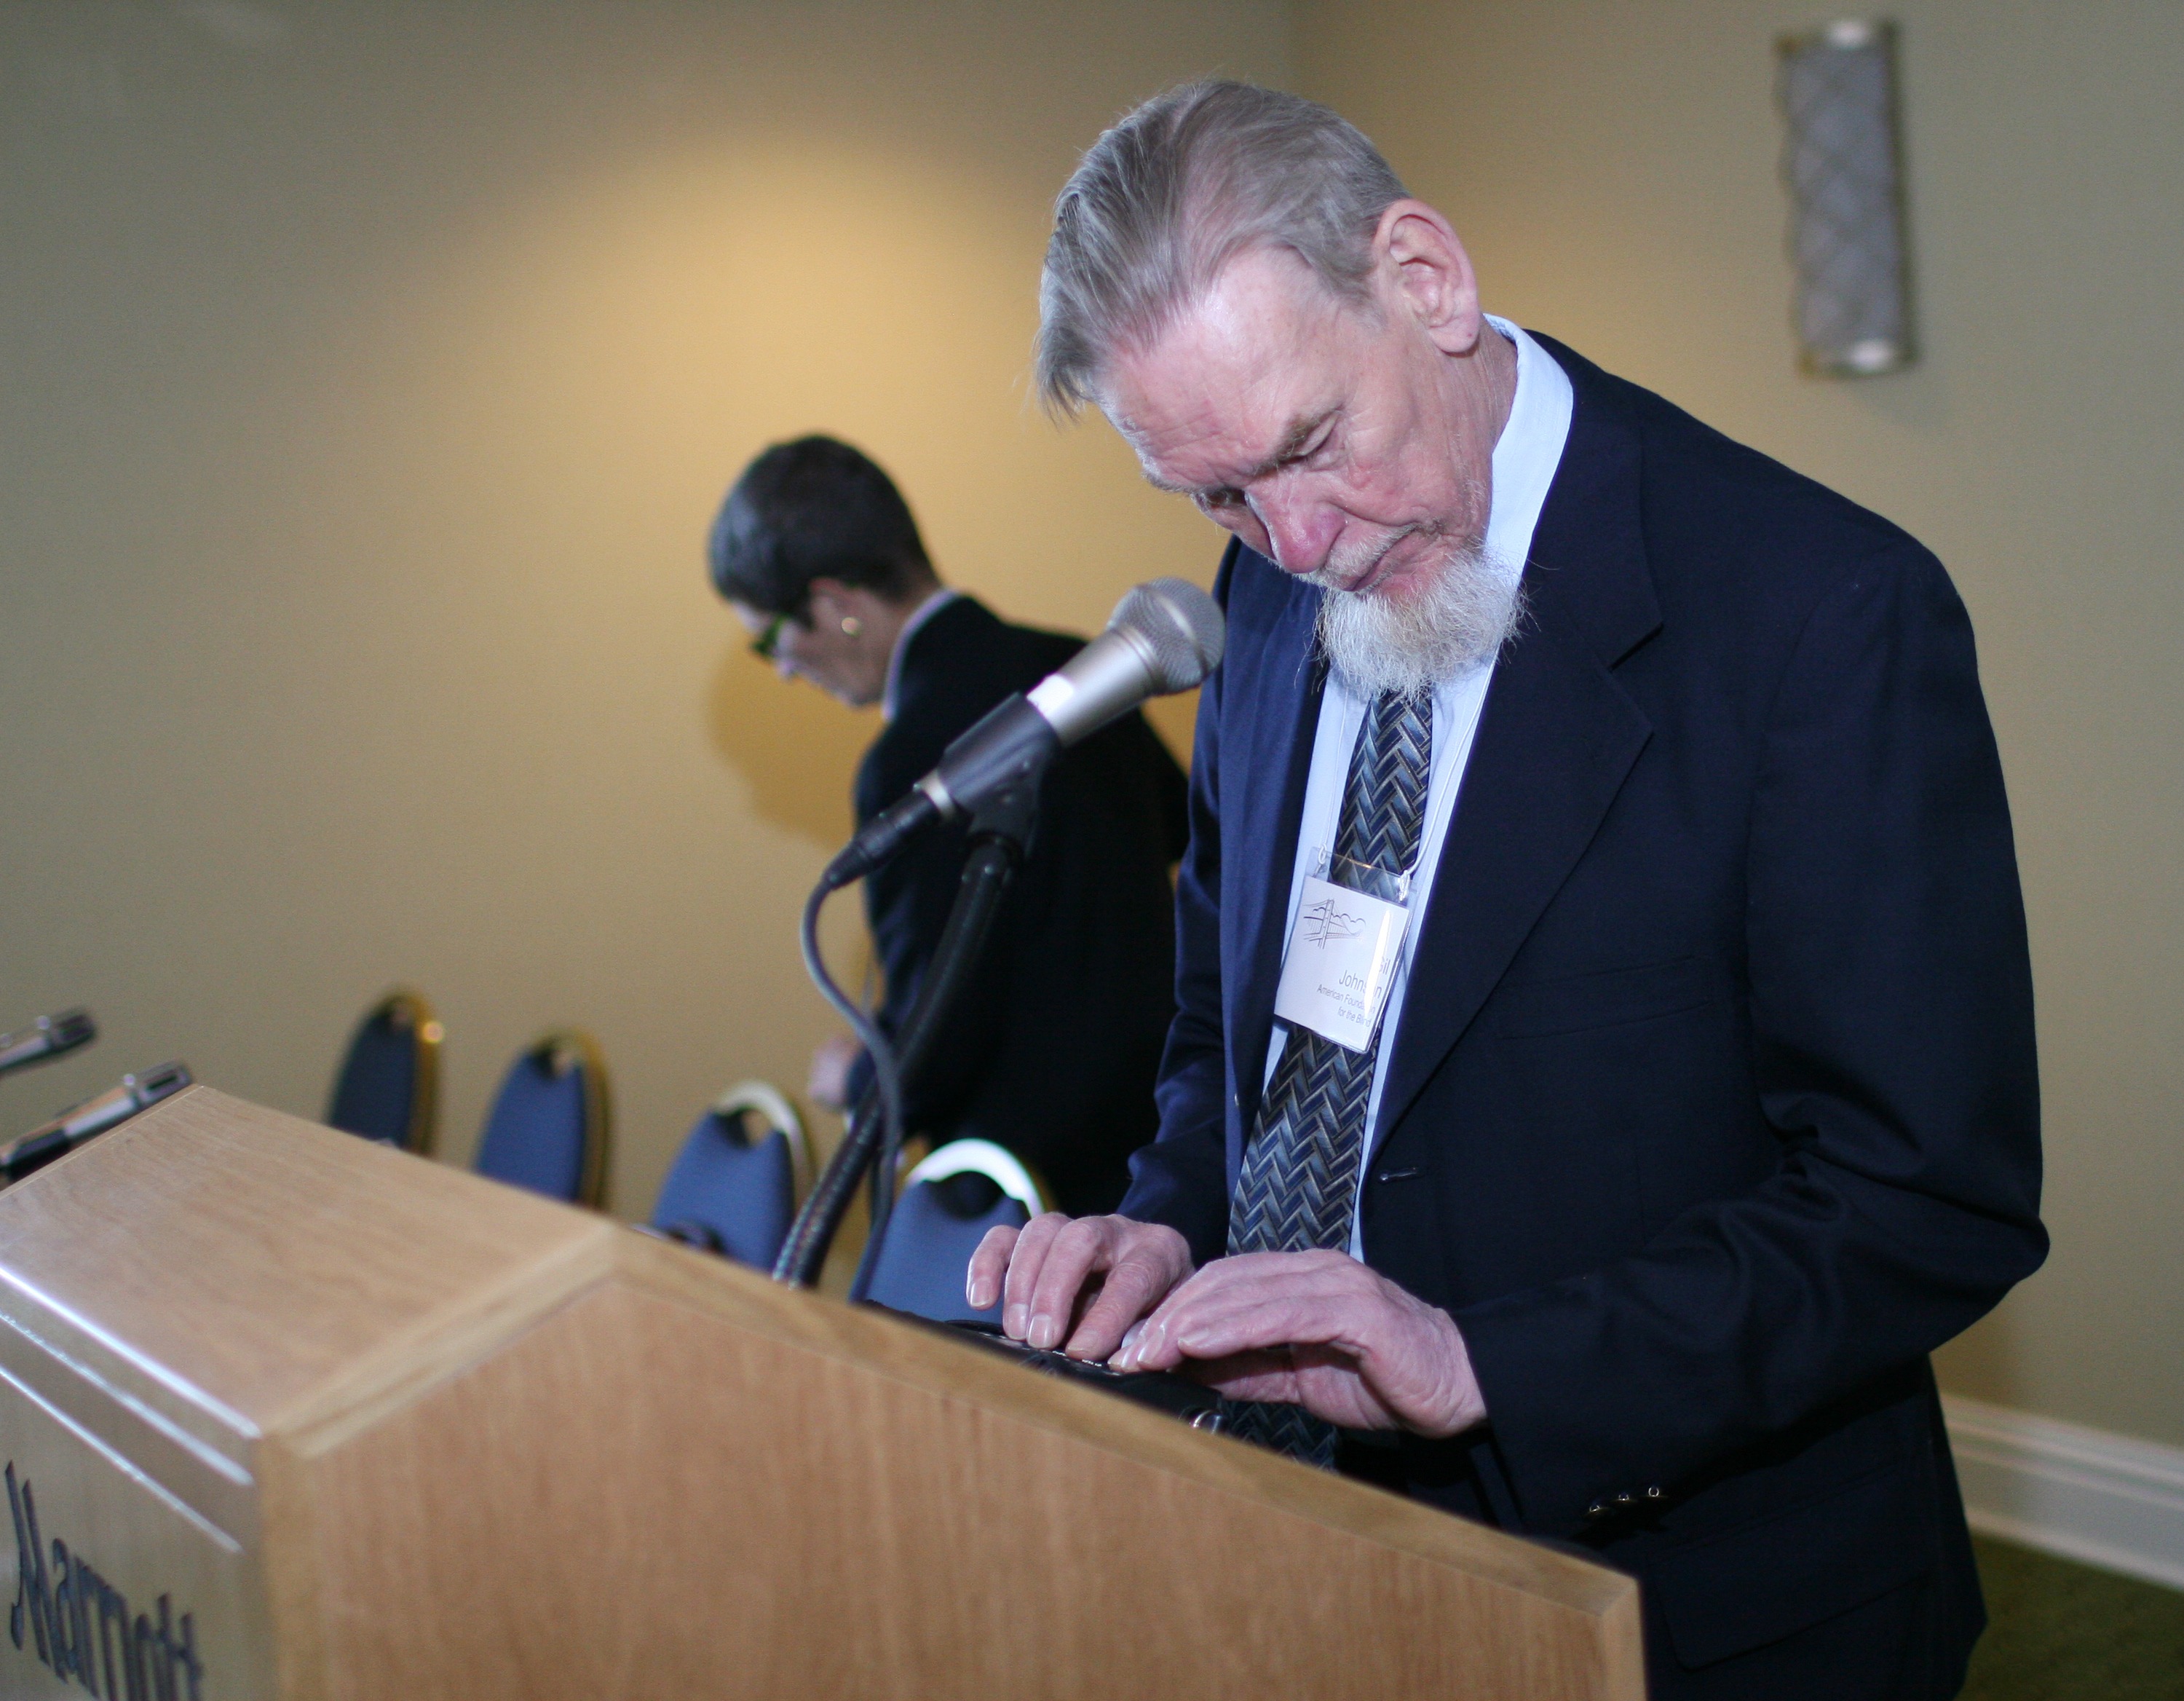 Gil Johnson speaks at a podium while reading from a braille display.